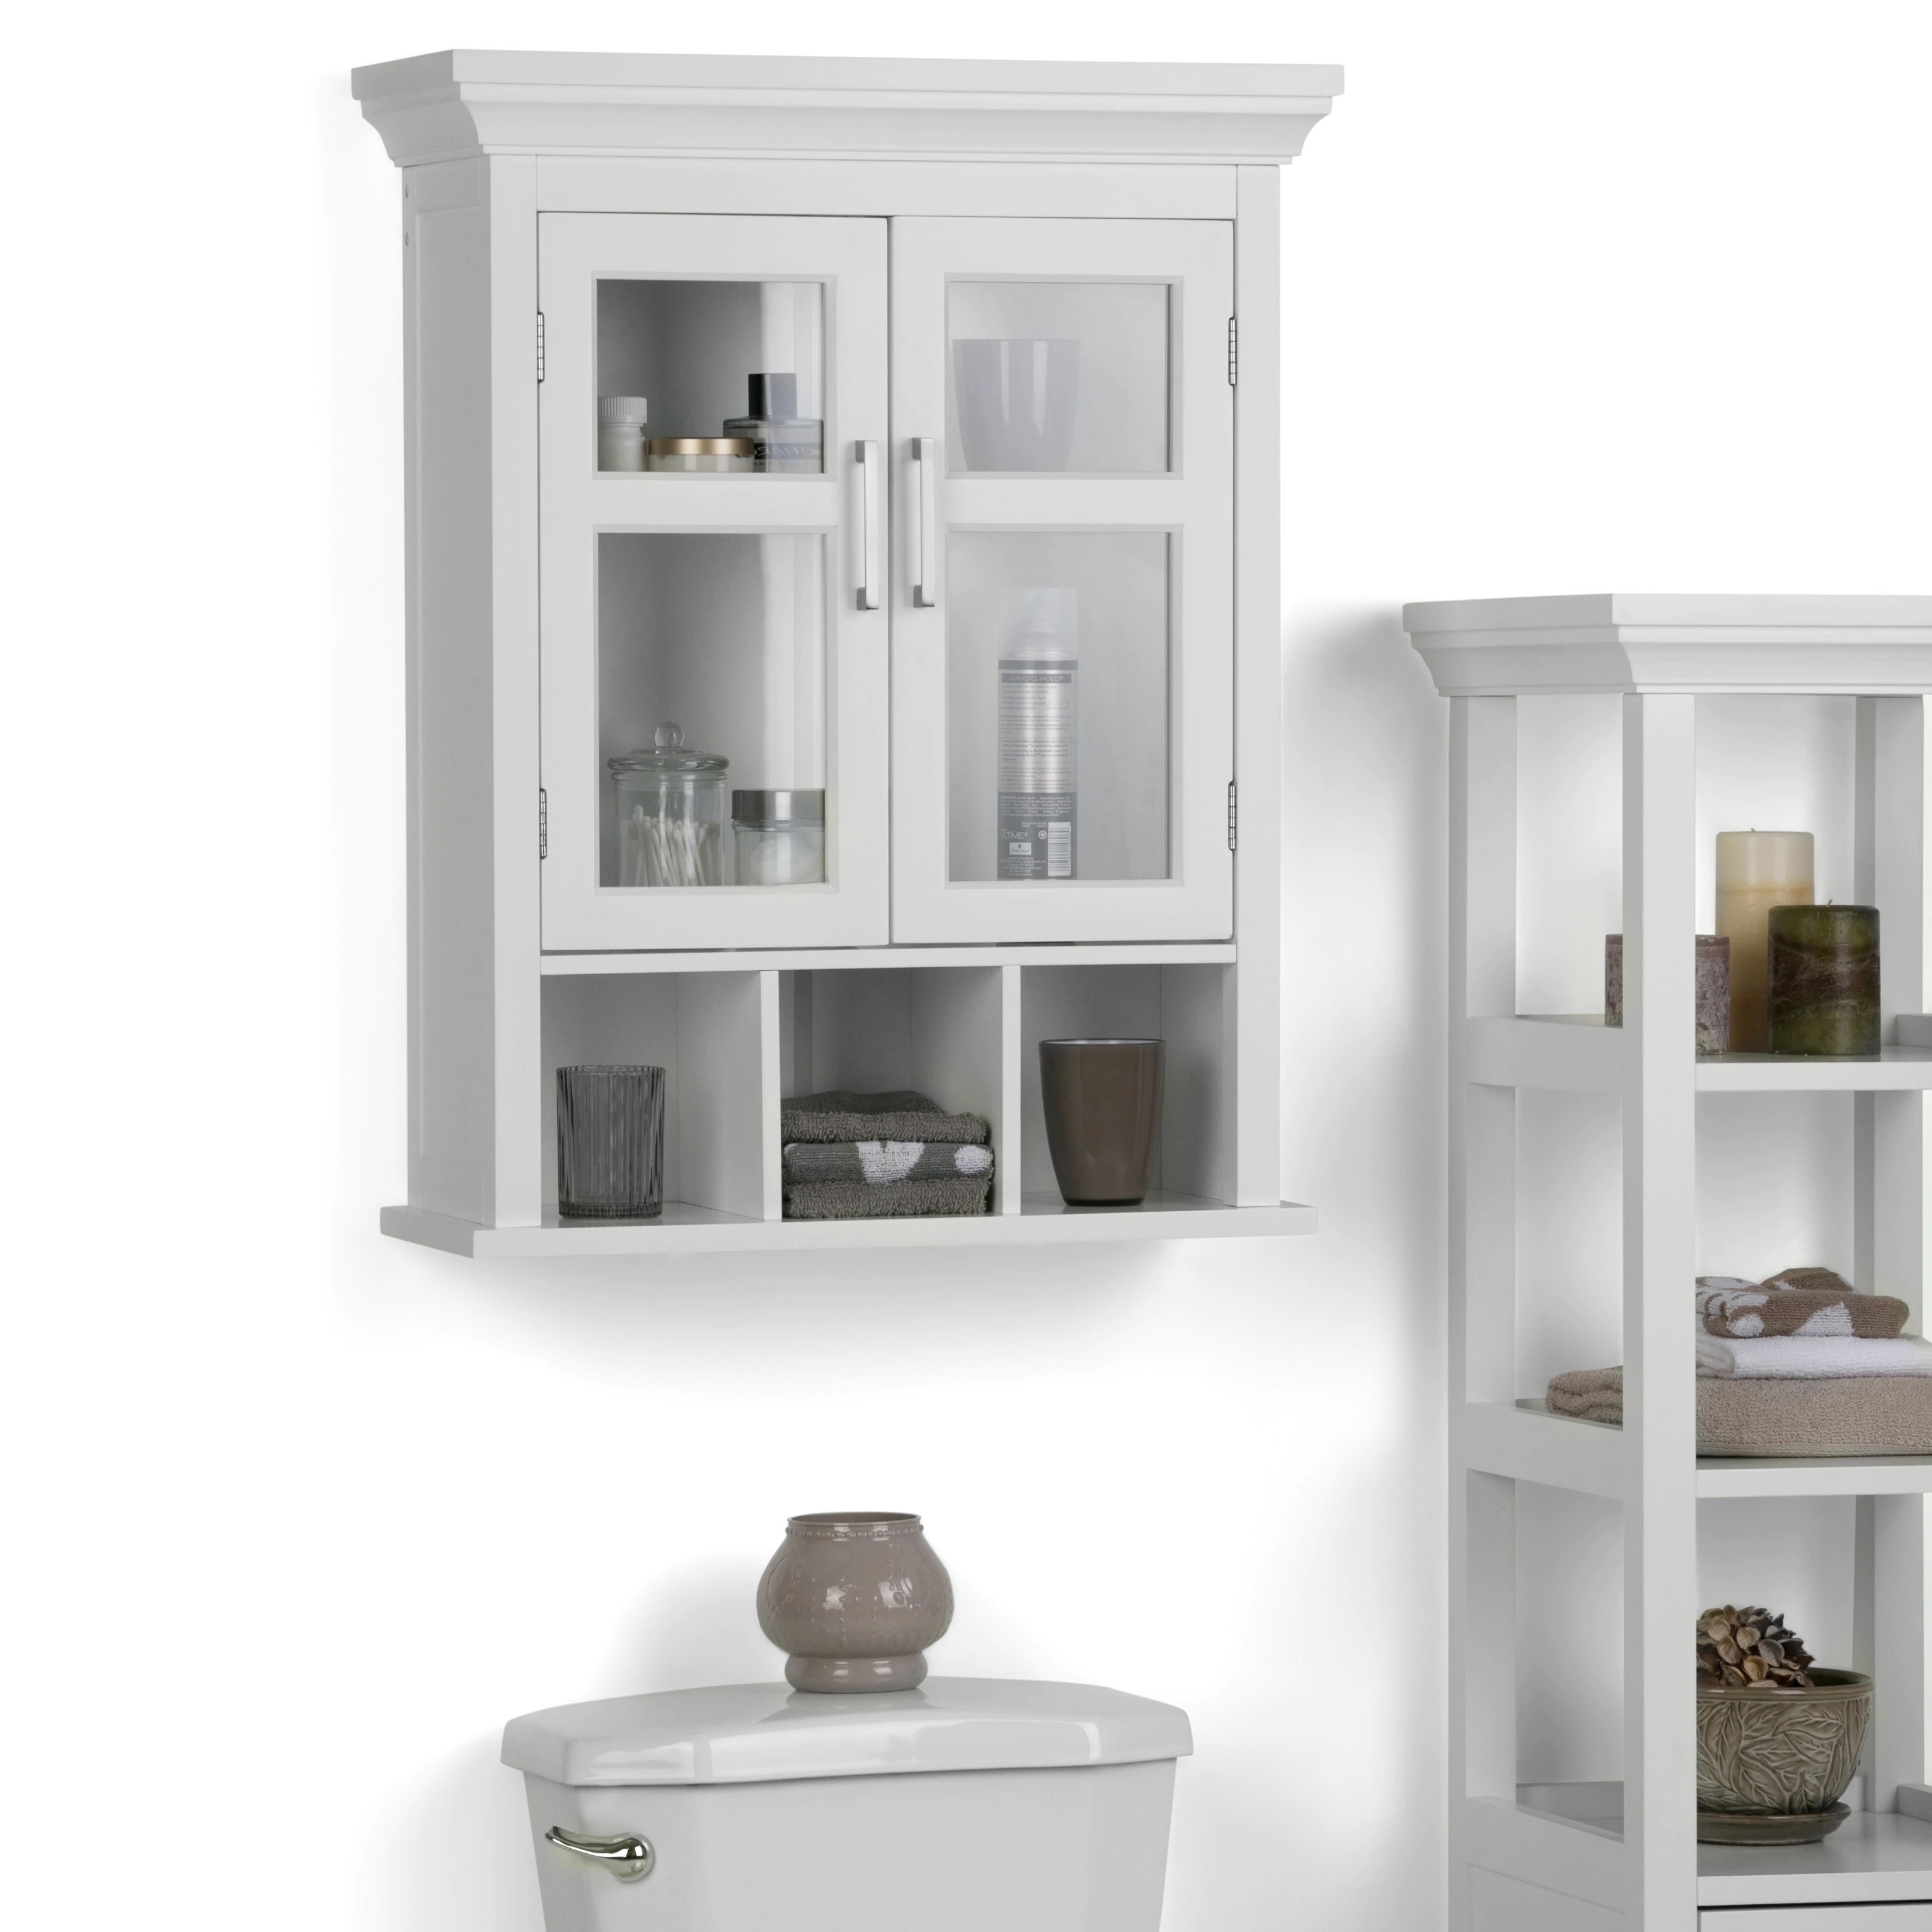 Wall Mounted Bathroom Cabinet Ideas with Cubbies